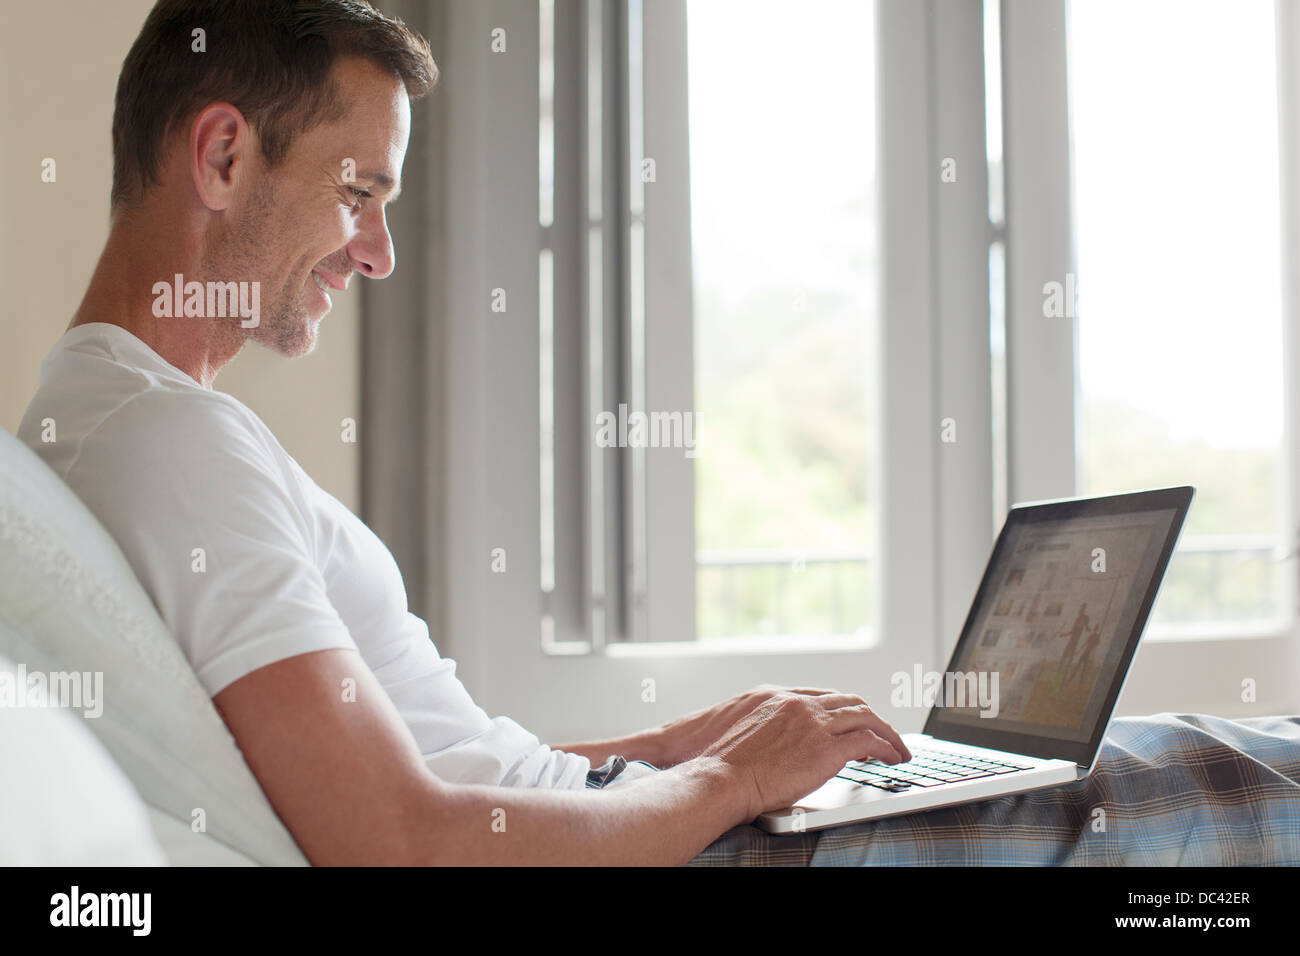 Smiling man using laptop in bed Banque D'Images